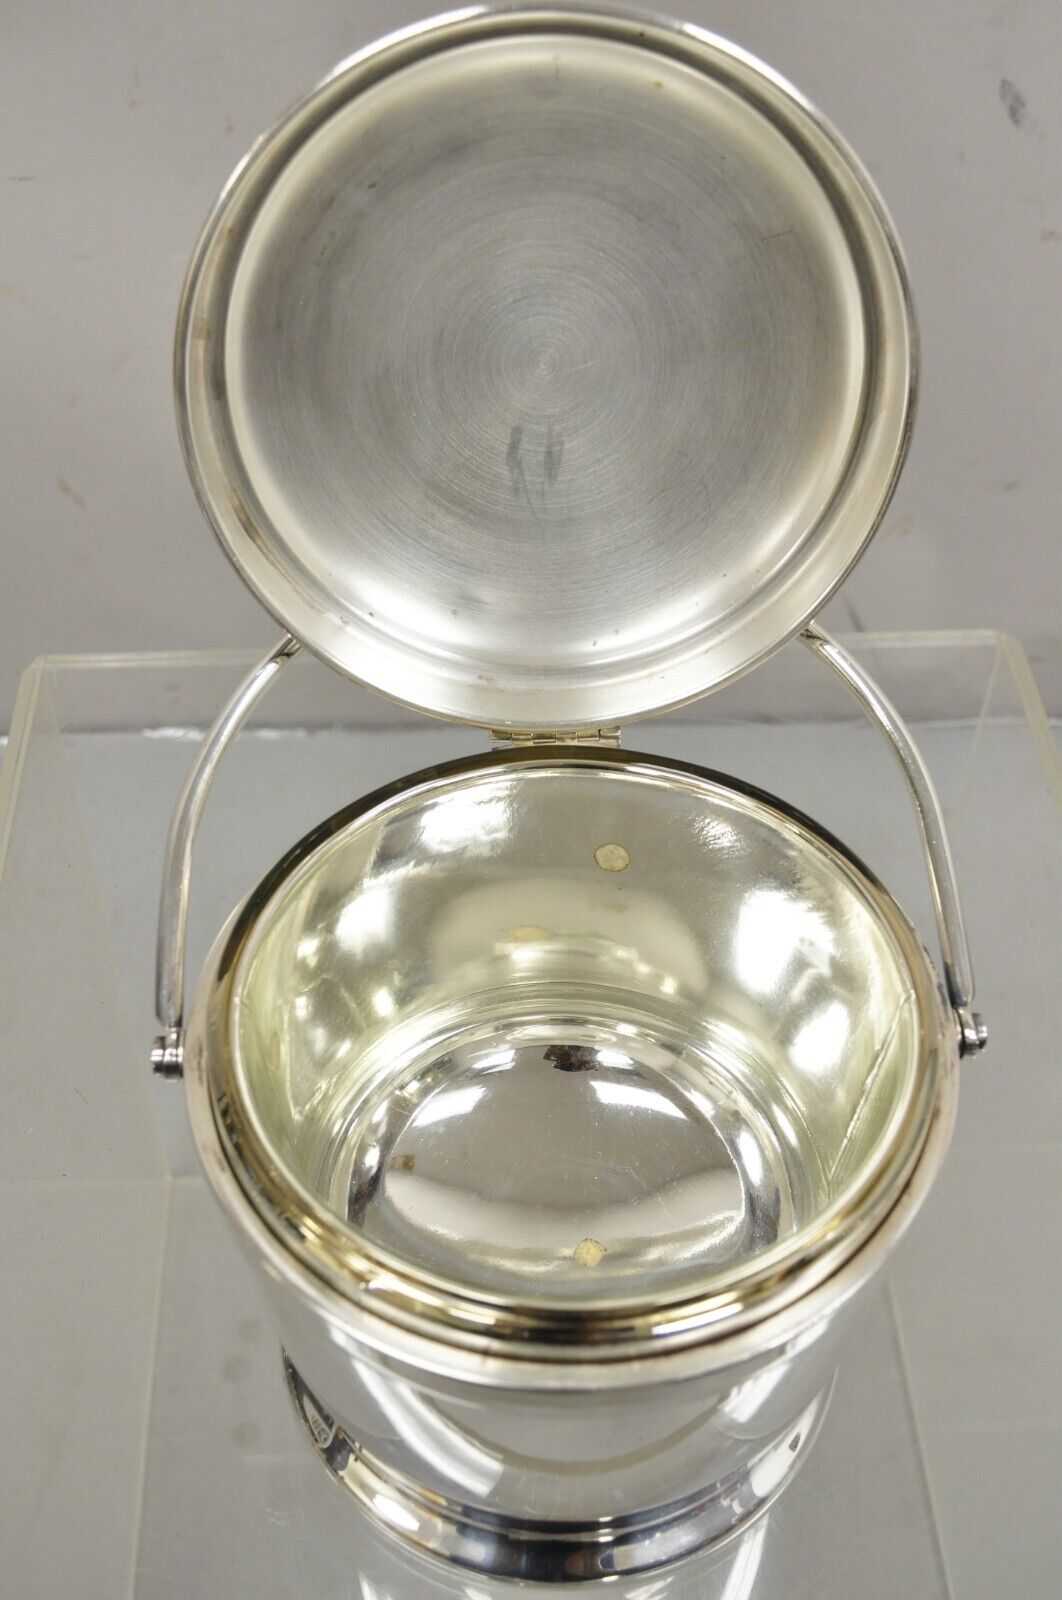 Bernard Rices Sons Inc. Silver Plated Art Deco Reticulating Hinge Ice Bucket